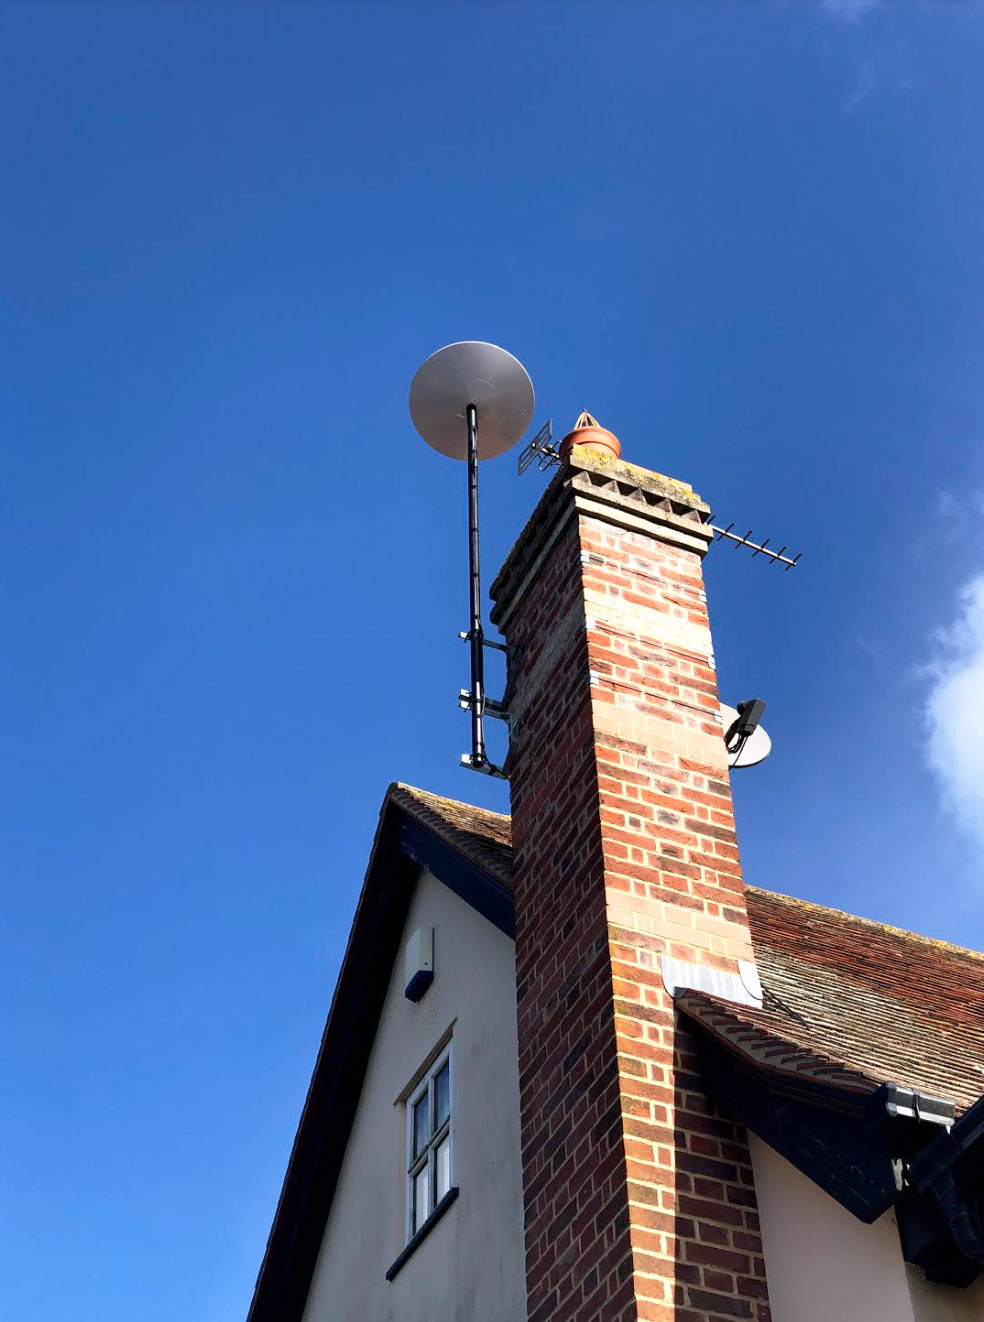 Starlink dish installed in Braintree for a fellow member of the Starlink Facebook group. This was a very high house and exposed to the elements so the pole was mounted on 2 large chimney brackets.